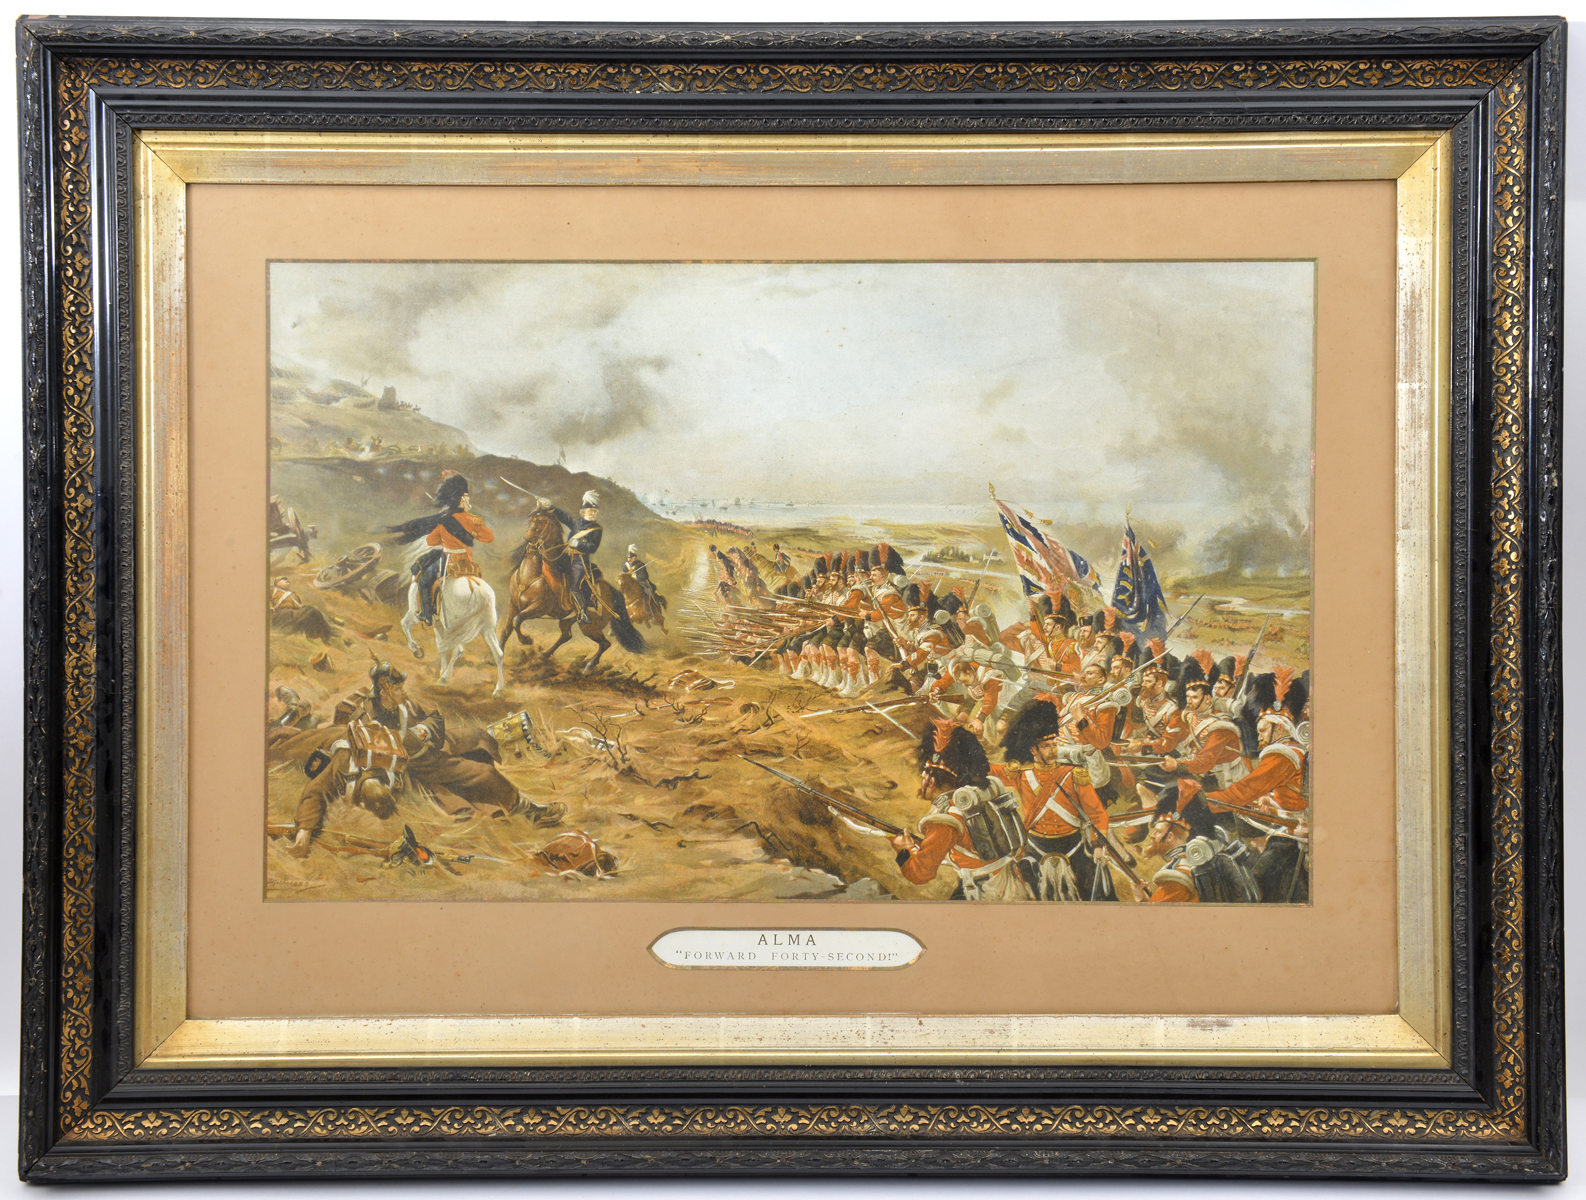 A large framed print “Alma: Forward Forty Second” showing a line of the 42nd Highlanders advancing - Image 2 of 2